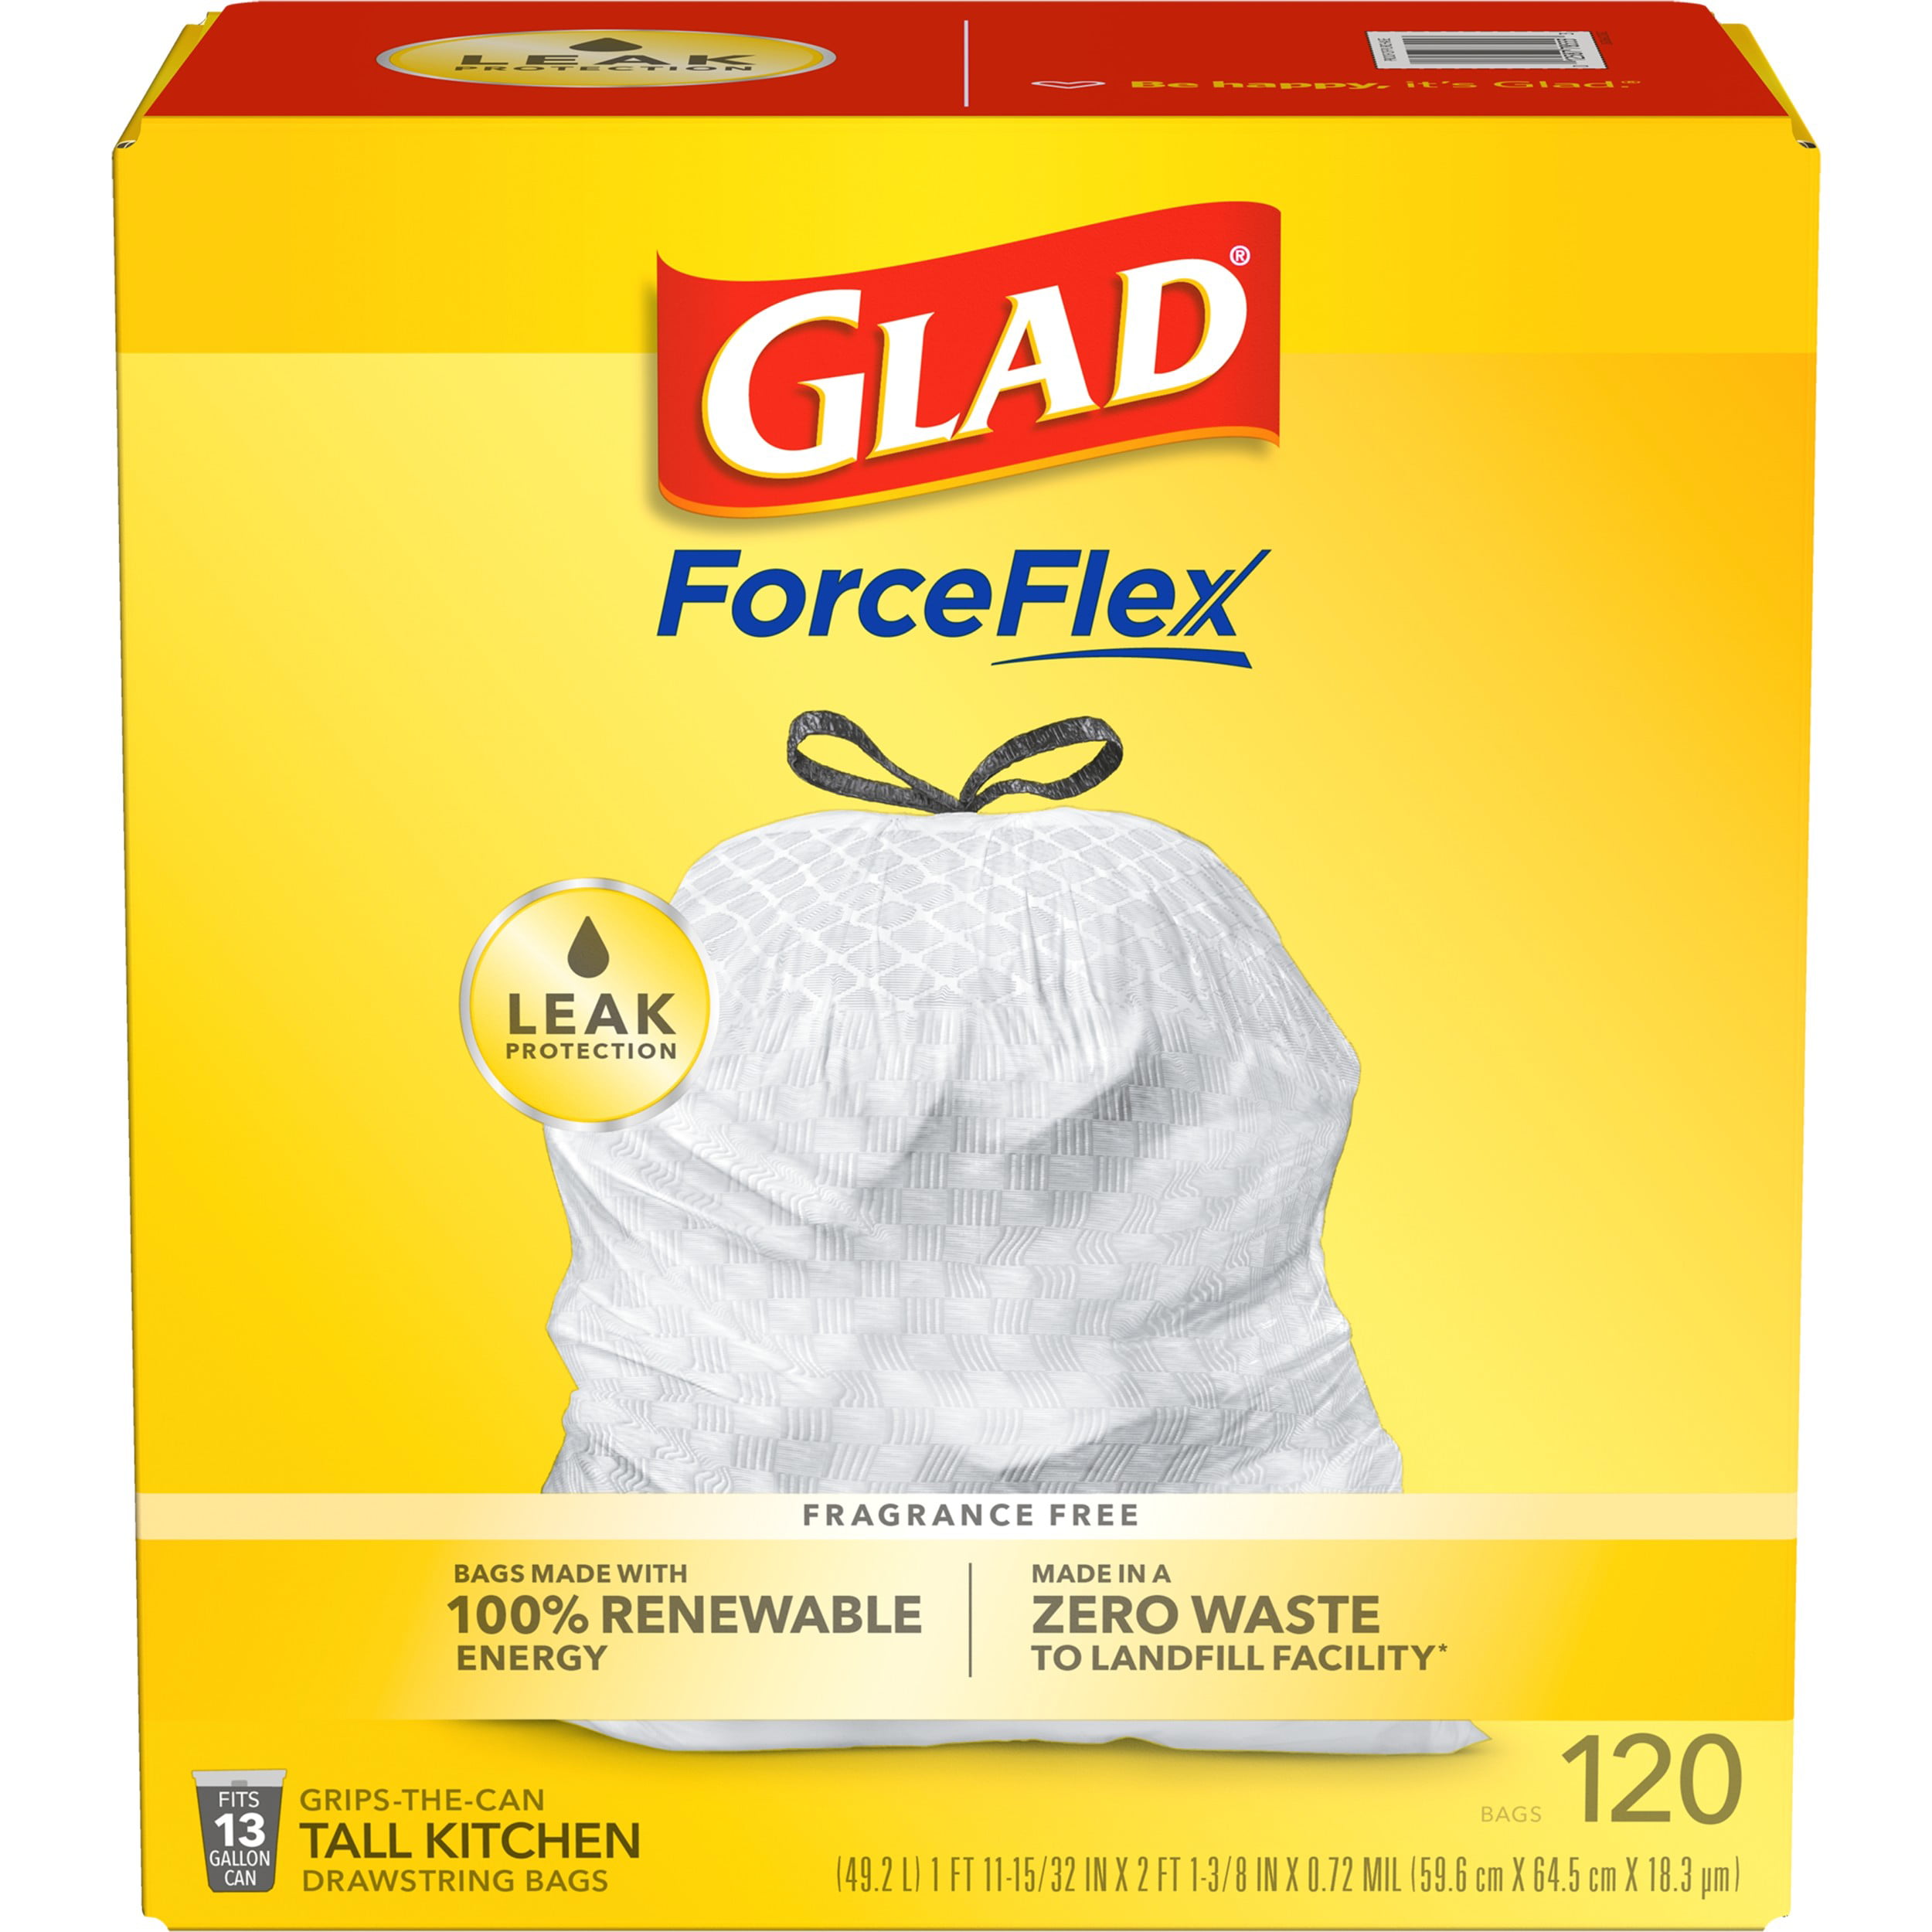 Great Value Strong Flex 13 Gallon Tall Kitchen Trash Bags, Mint Scent, 40  Count - DroneUp Delivery